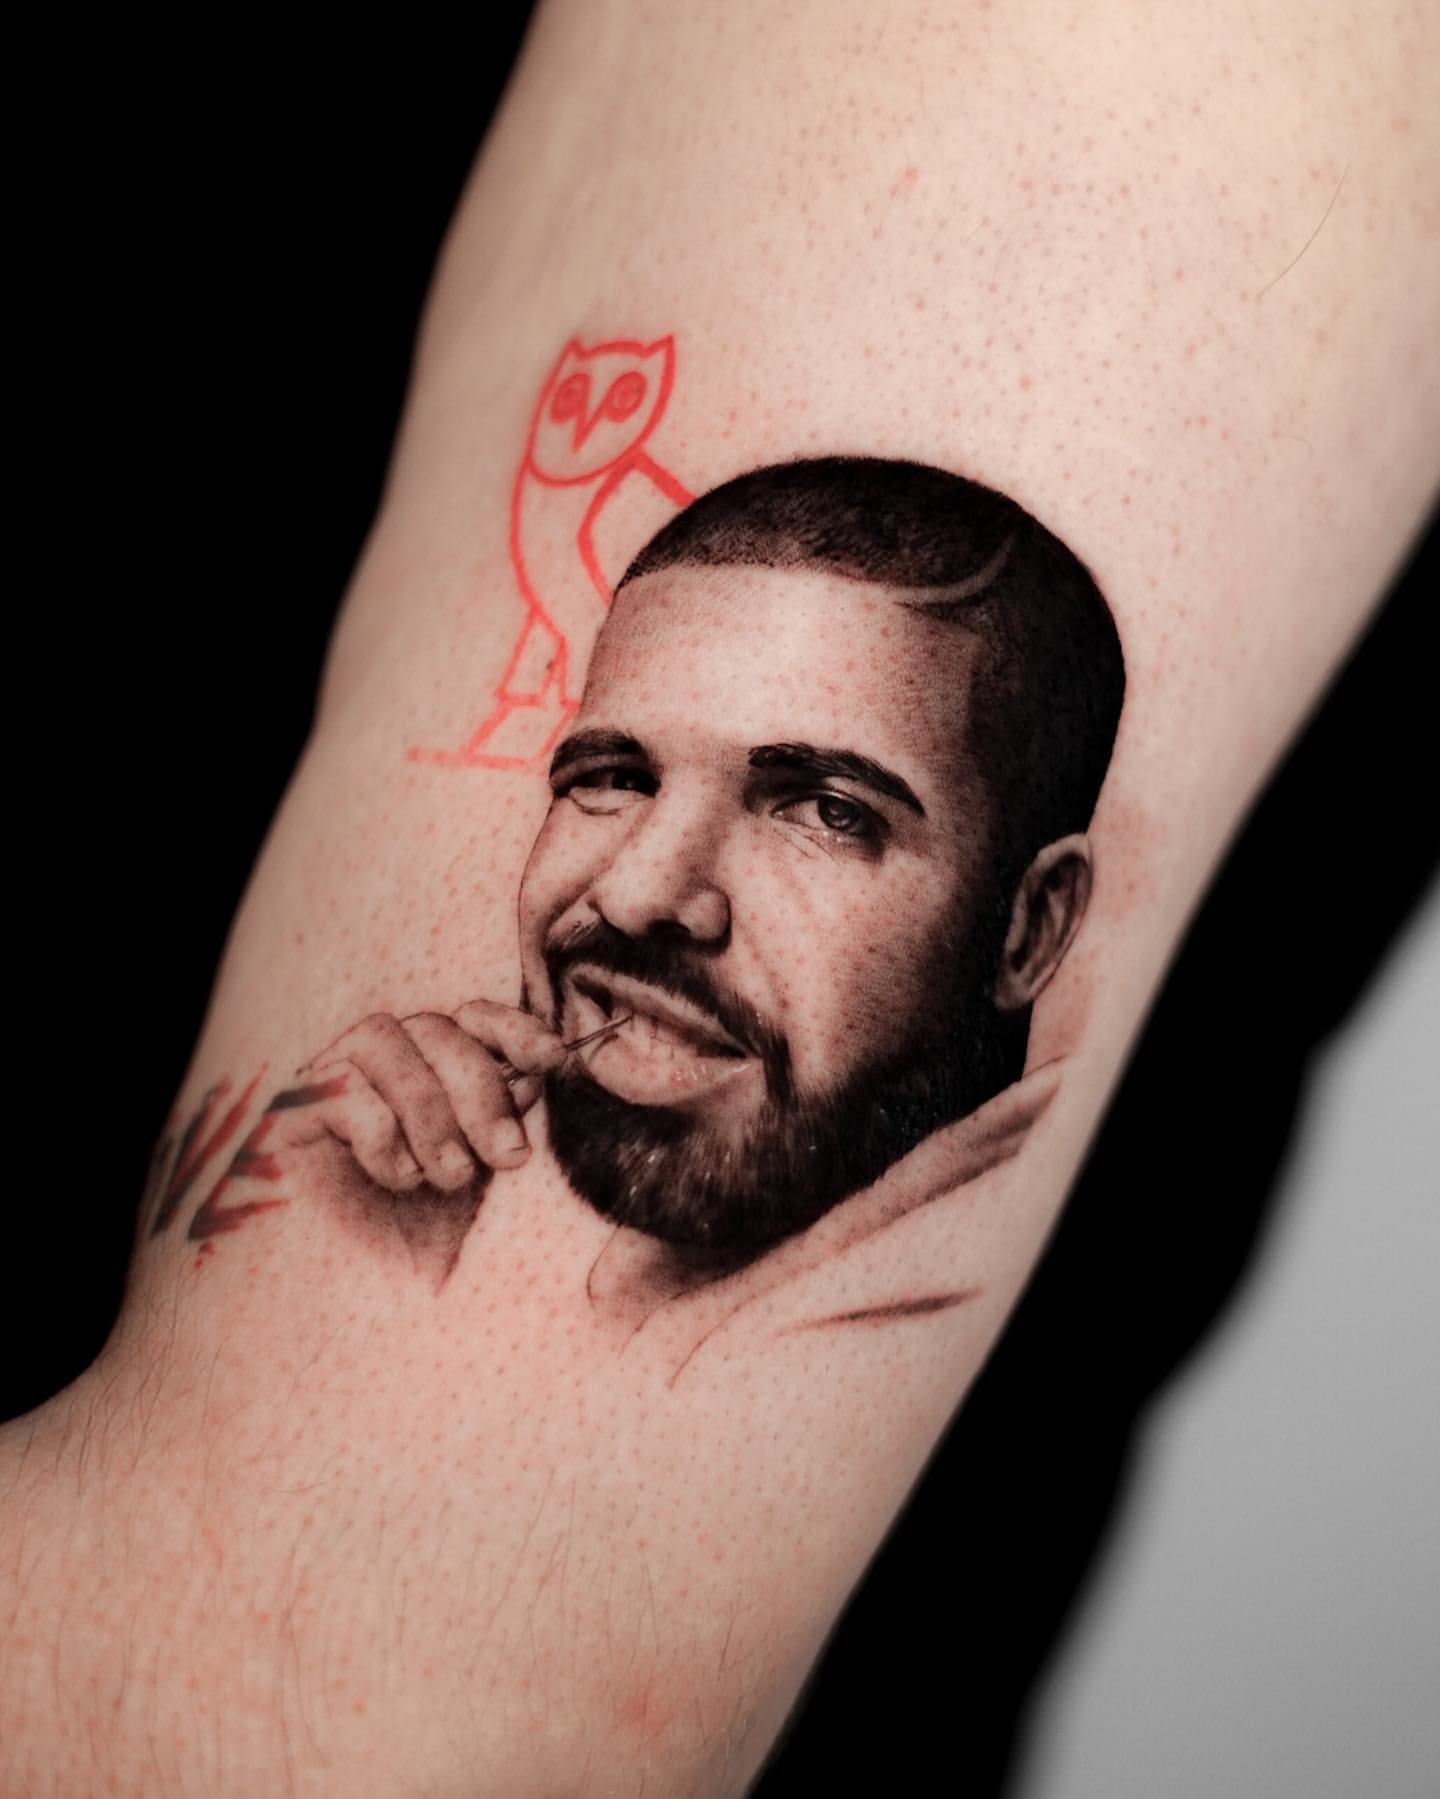 Drake Hits the Gym and Shows Off Tattoos